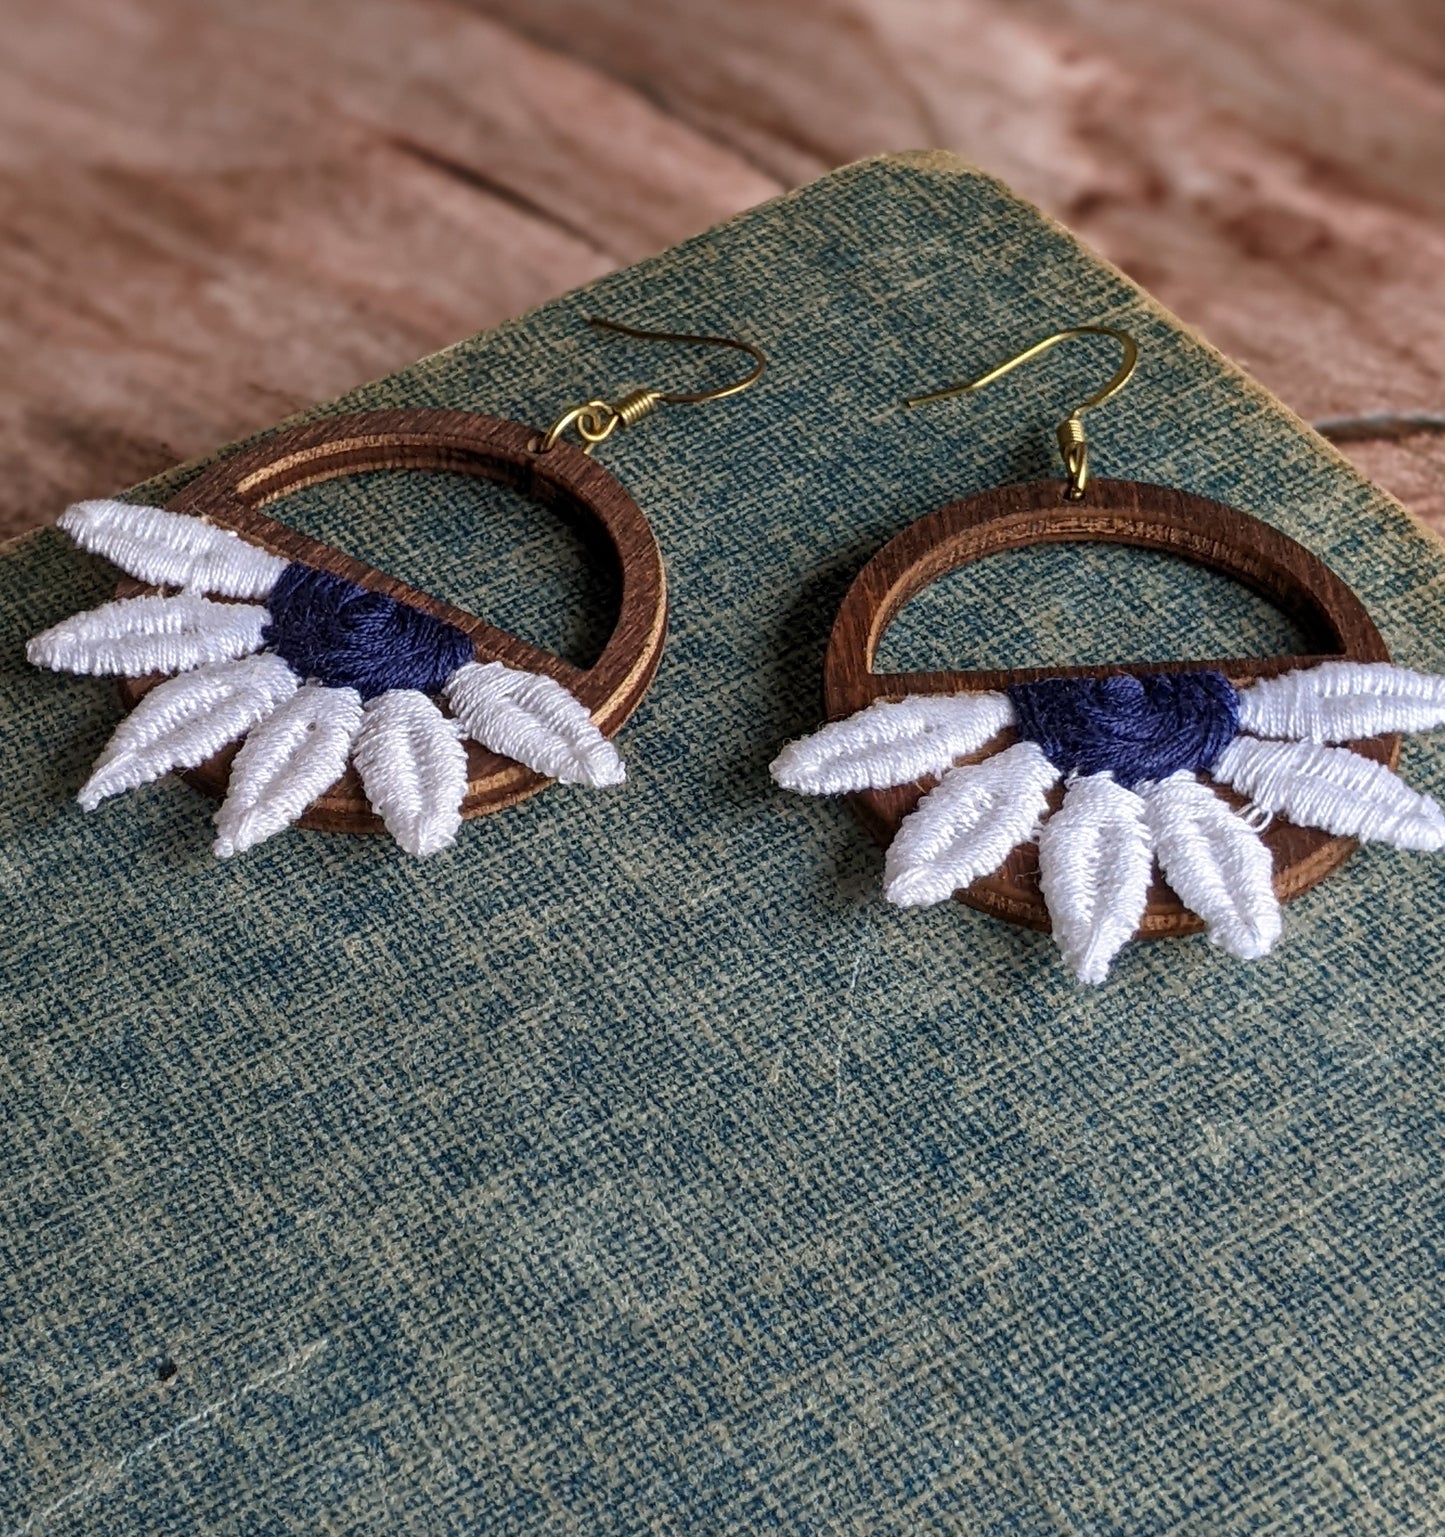 Half Daisy Earrings Made With Vintage 90s Fabric Flowers And Wood Hoops - Navy Blue And White